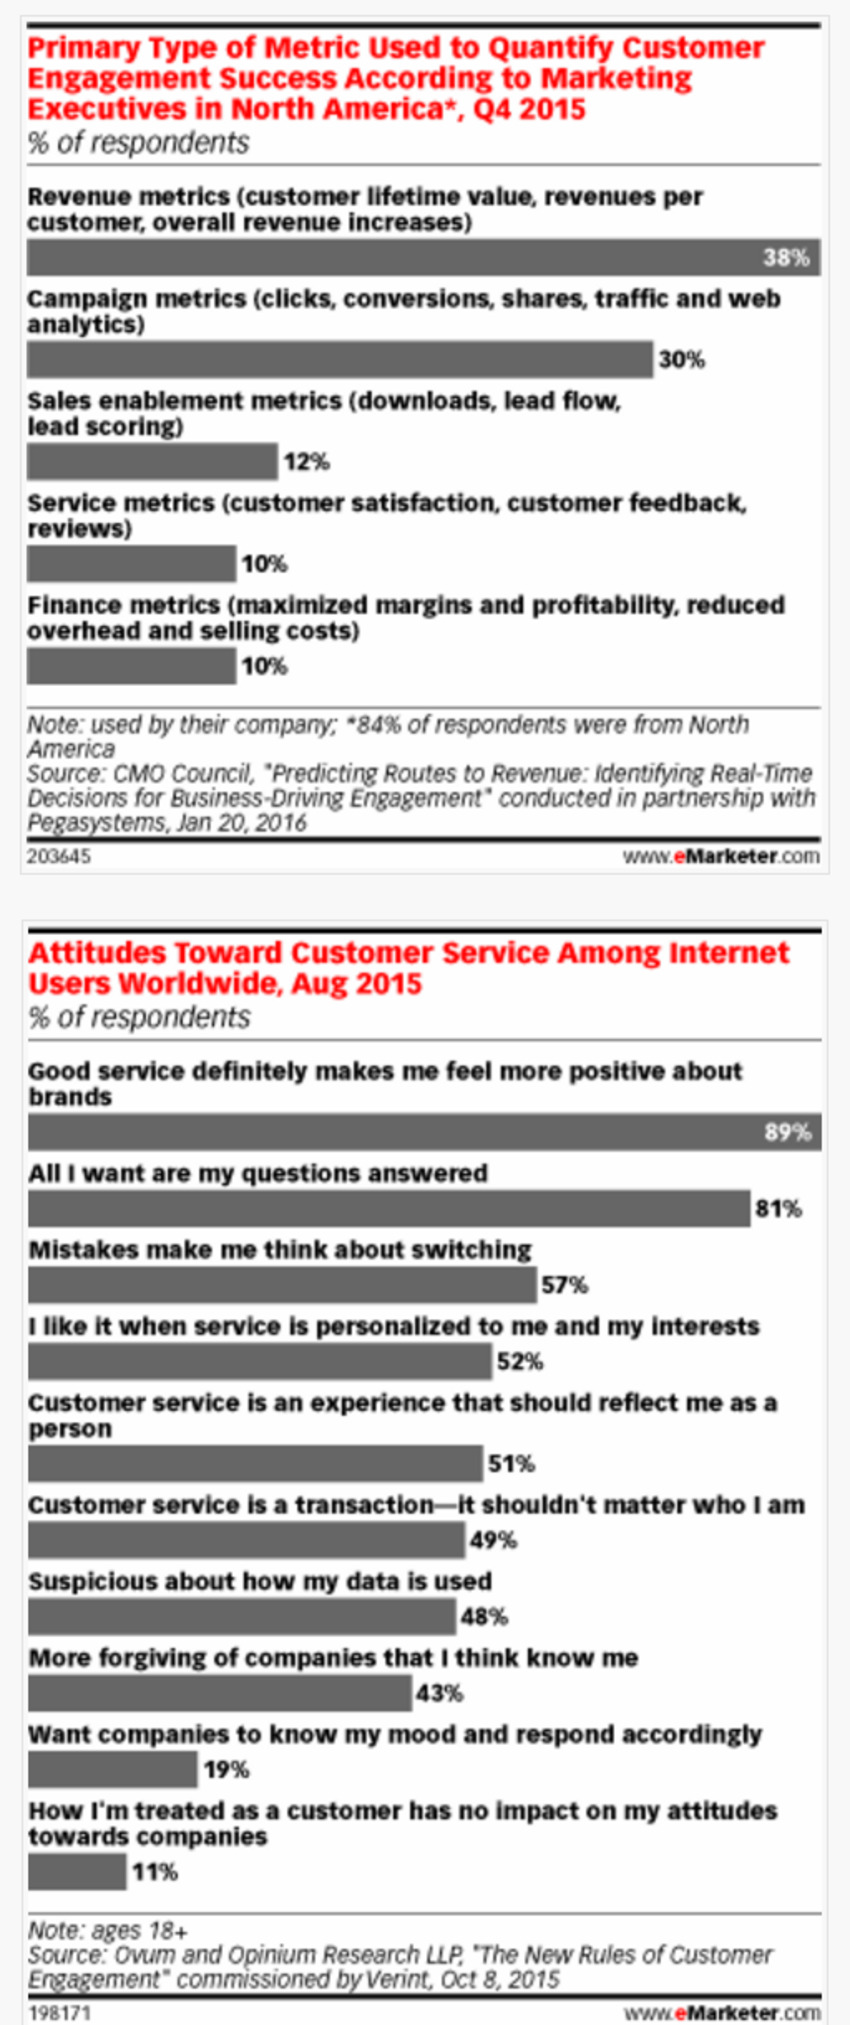 How Marketers Are Measuring Customer Engagement - eMarketer | The MarTech Digest | Scoop.it